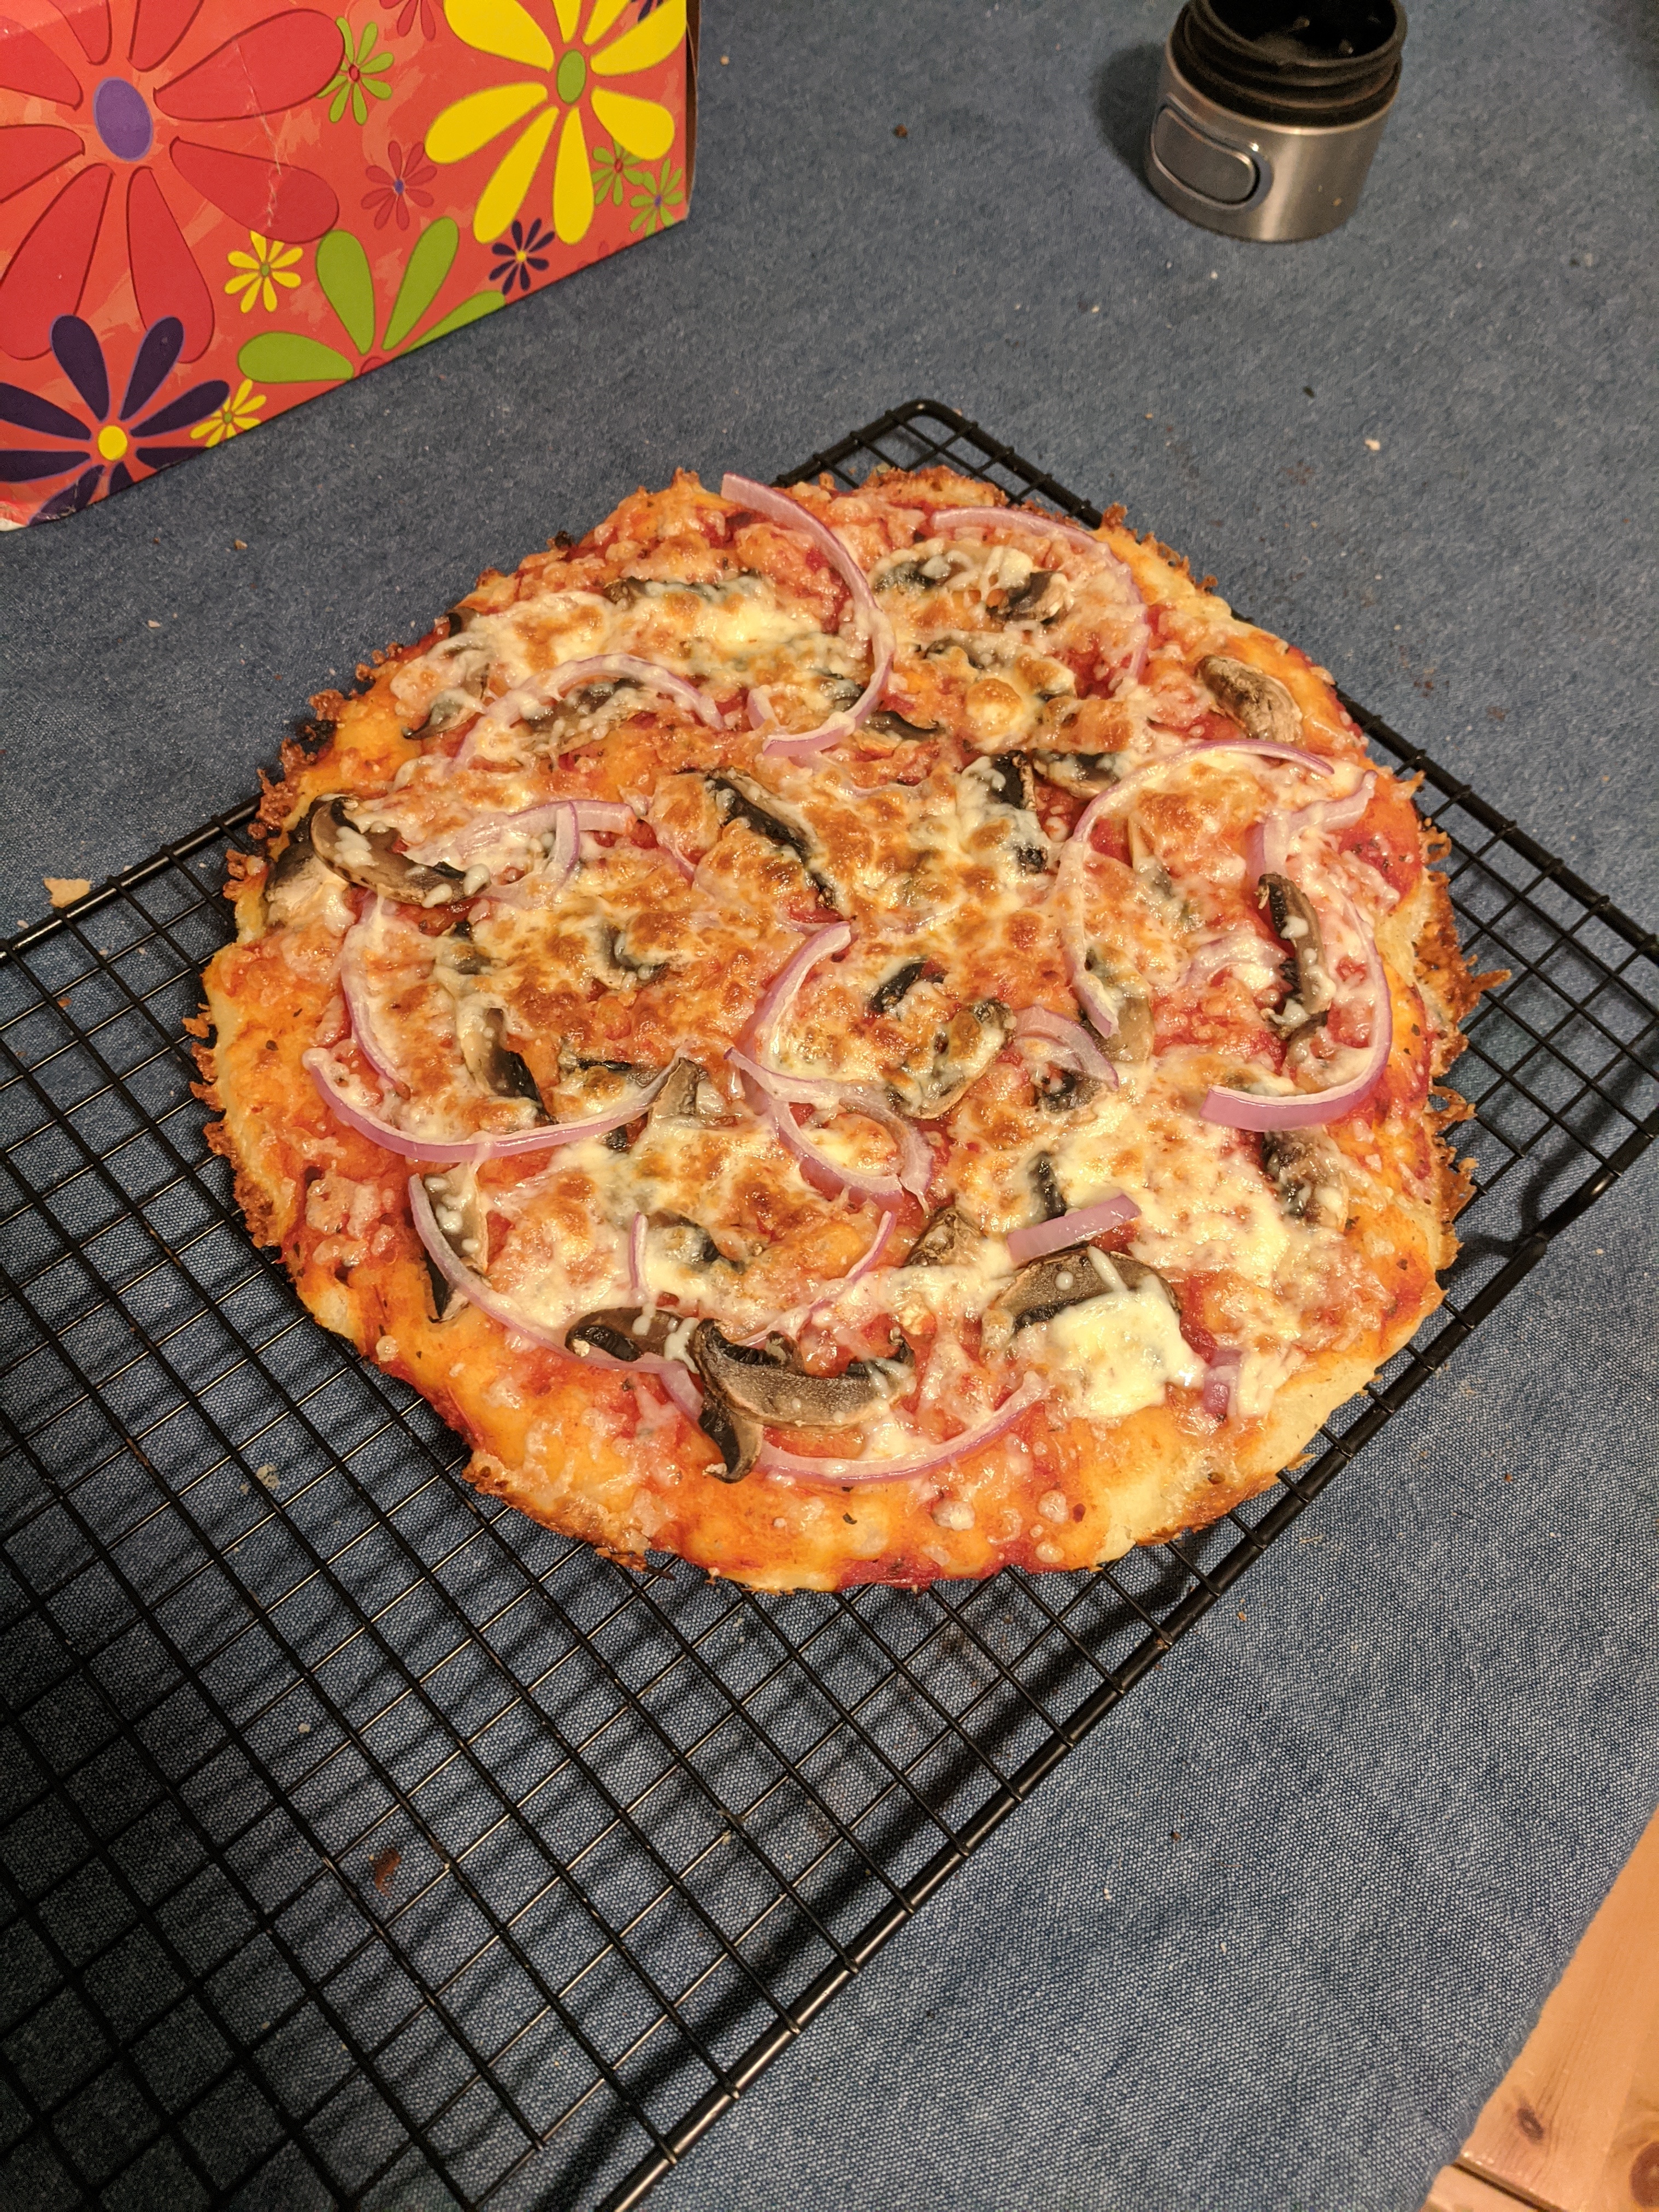 Mostly round, crispy cheesy edges, topped with red onion and mushroom.